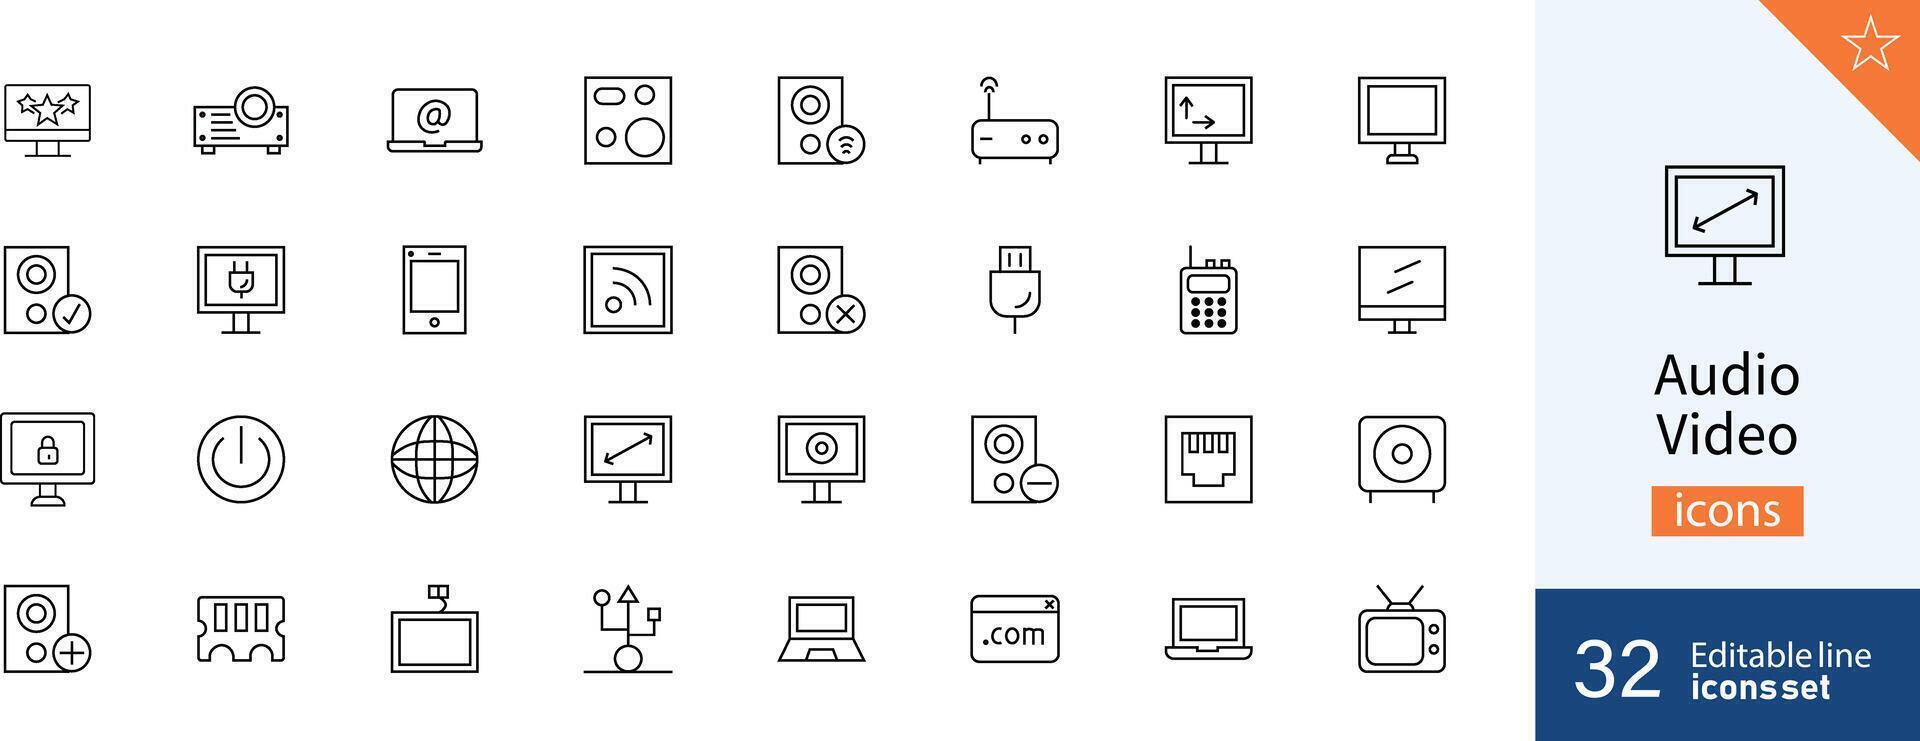 Set of 32 Audio and video web icons in line style. Voice, radio, music streaming, photography. Vector illustration.